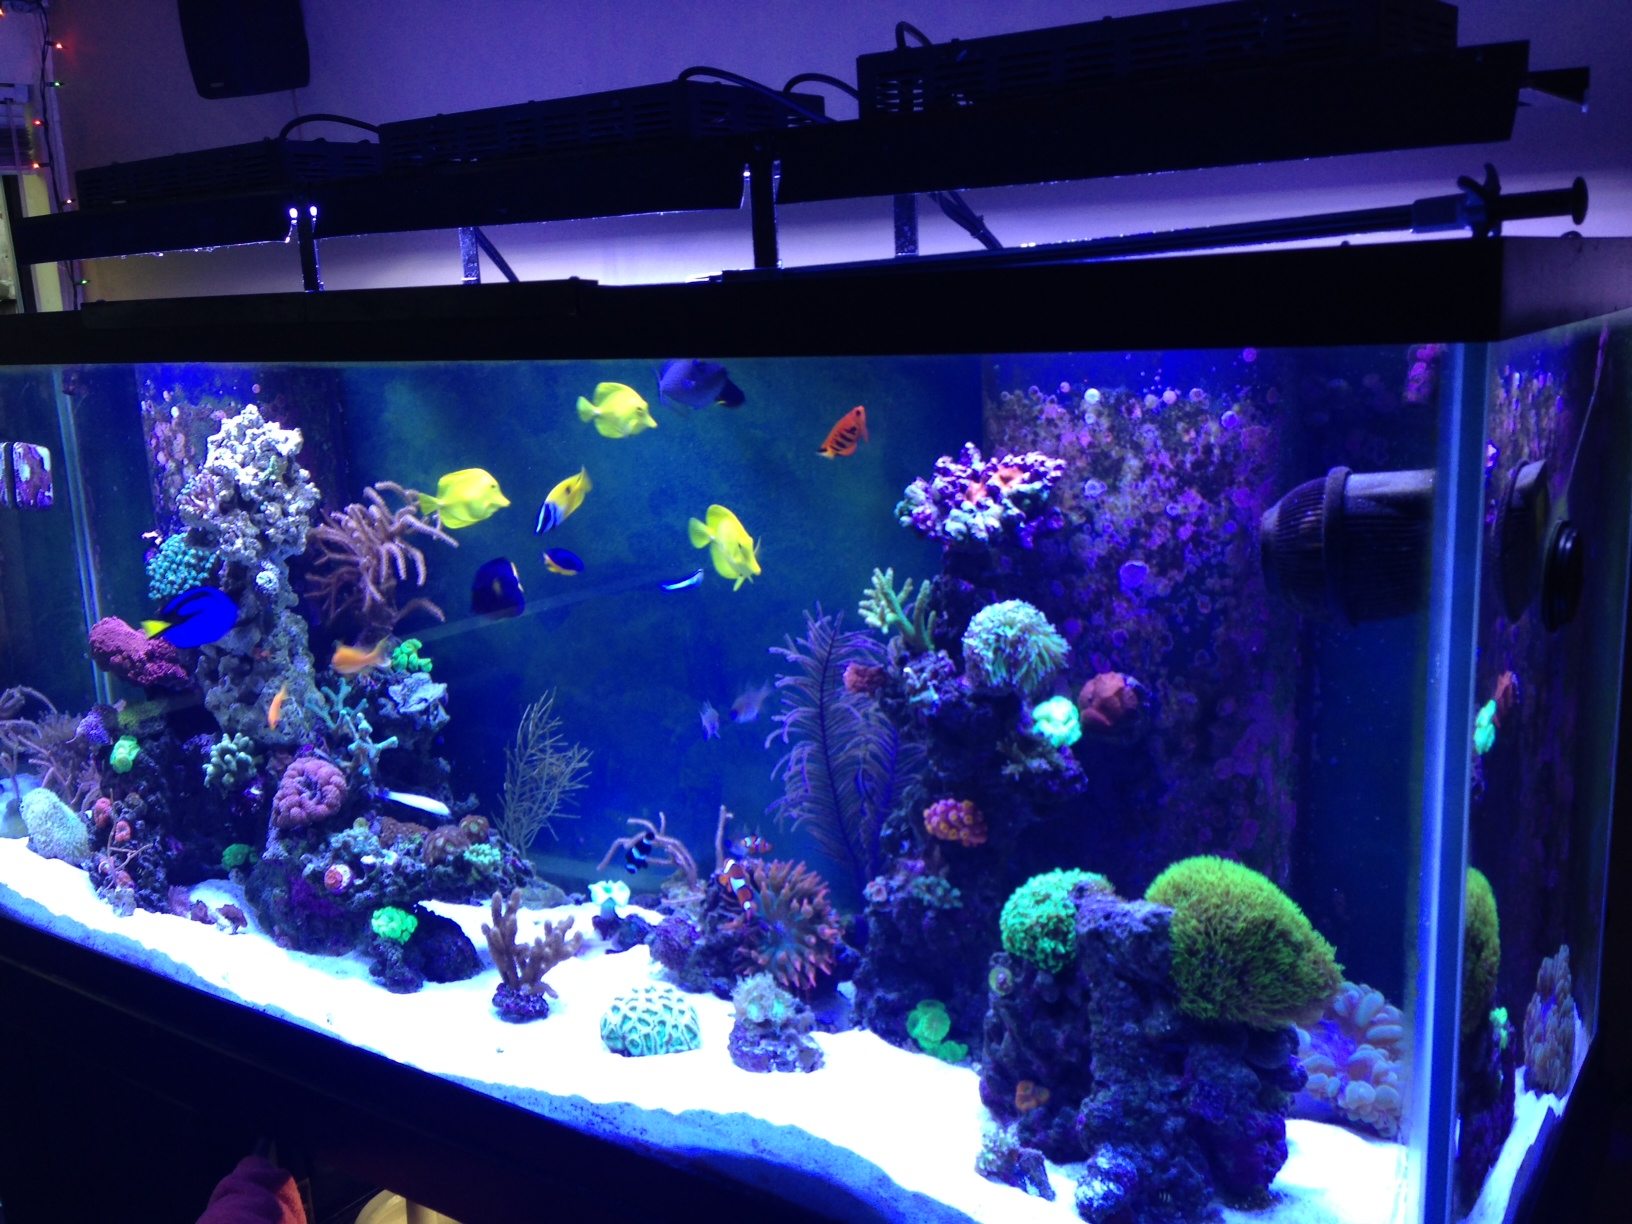 where to place wavemaker in saltwater aquarium